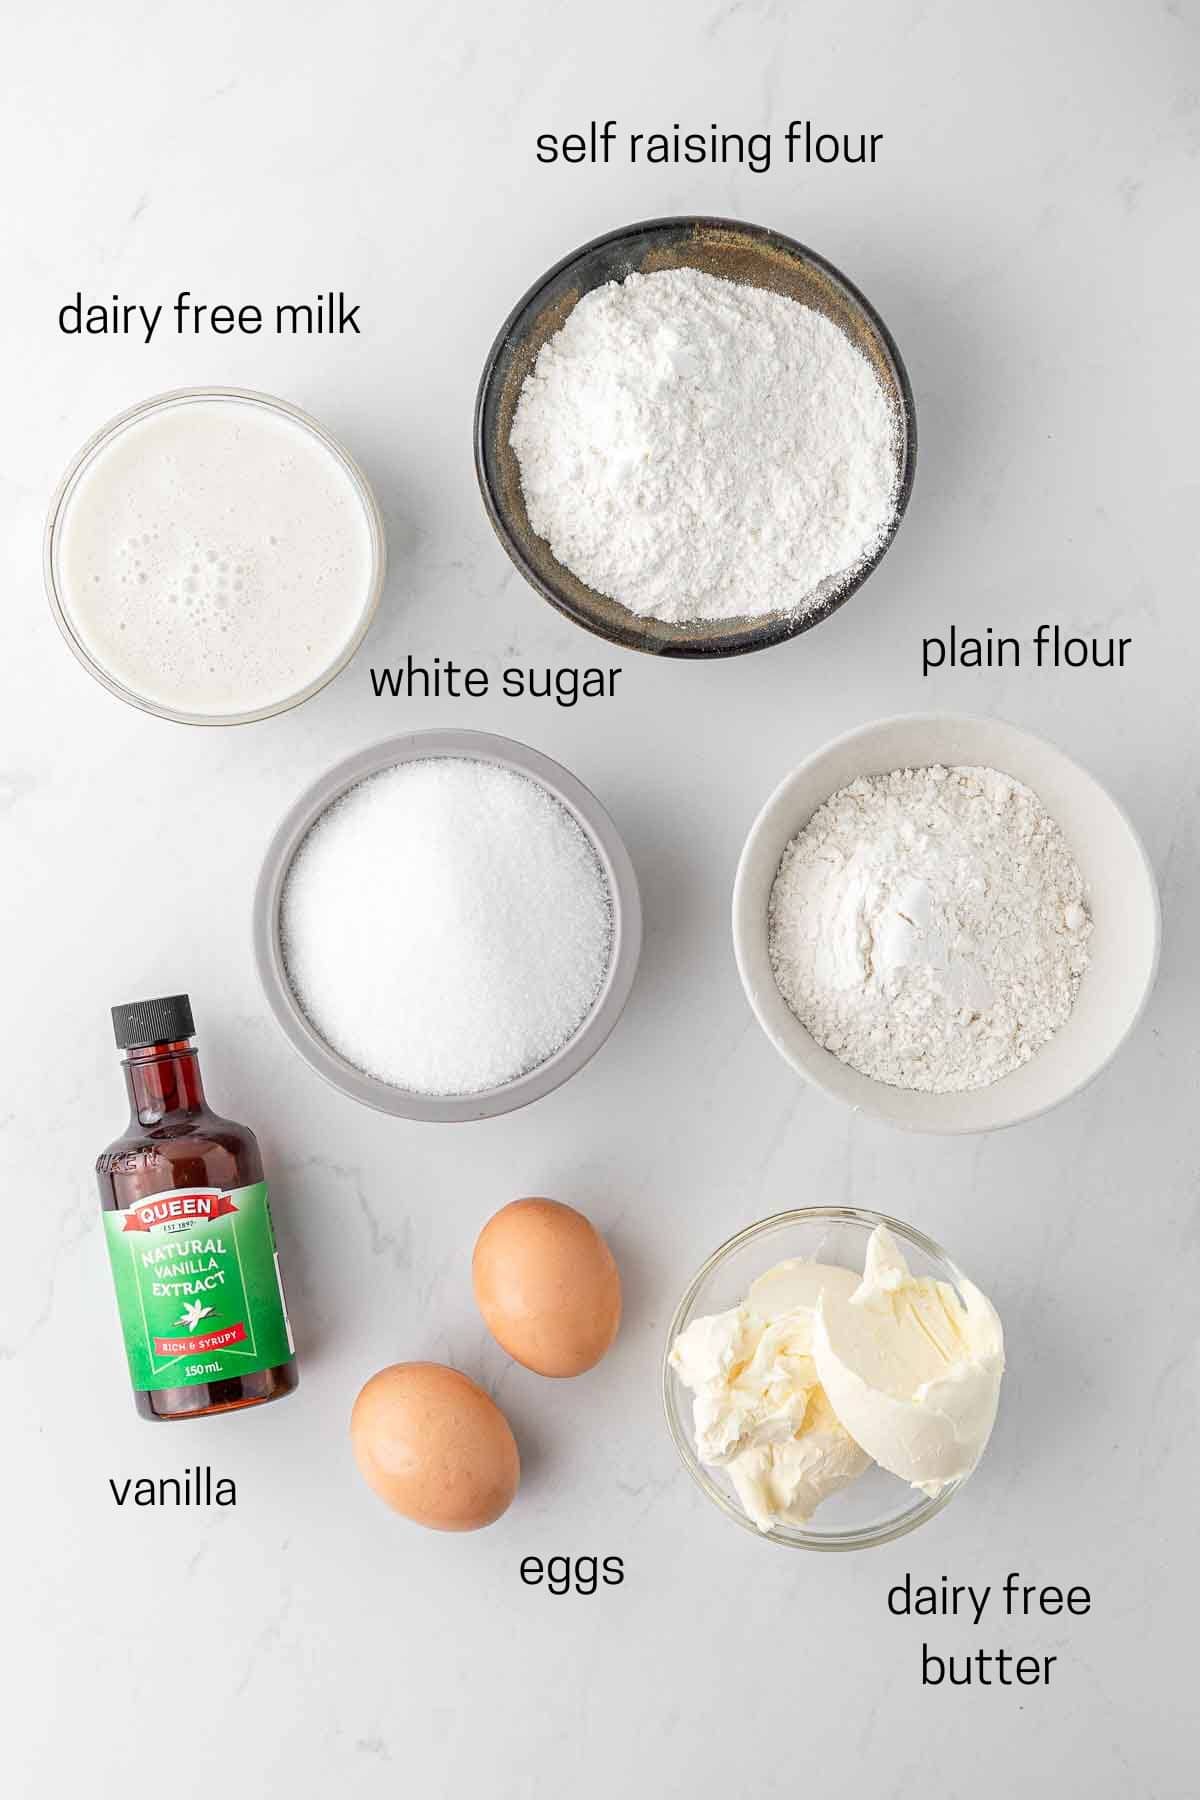 All ingredients needed for vanilla cupcakes laid out in bowls.